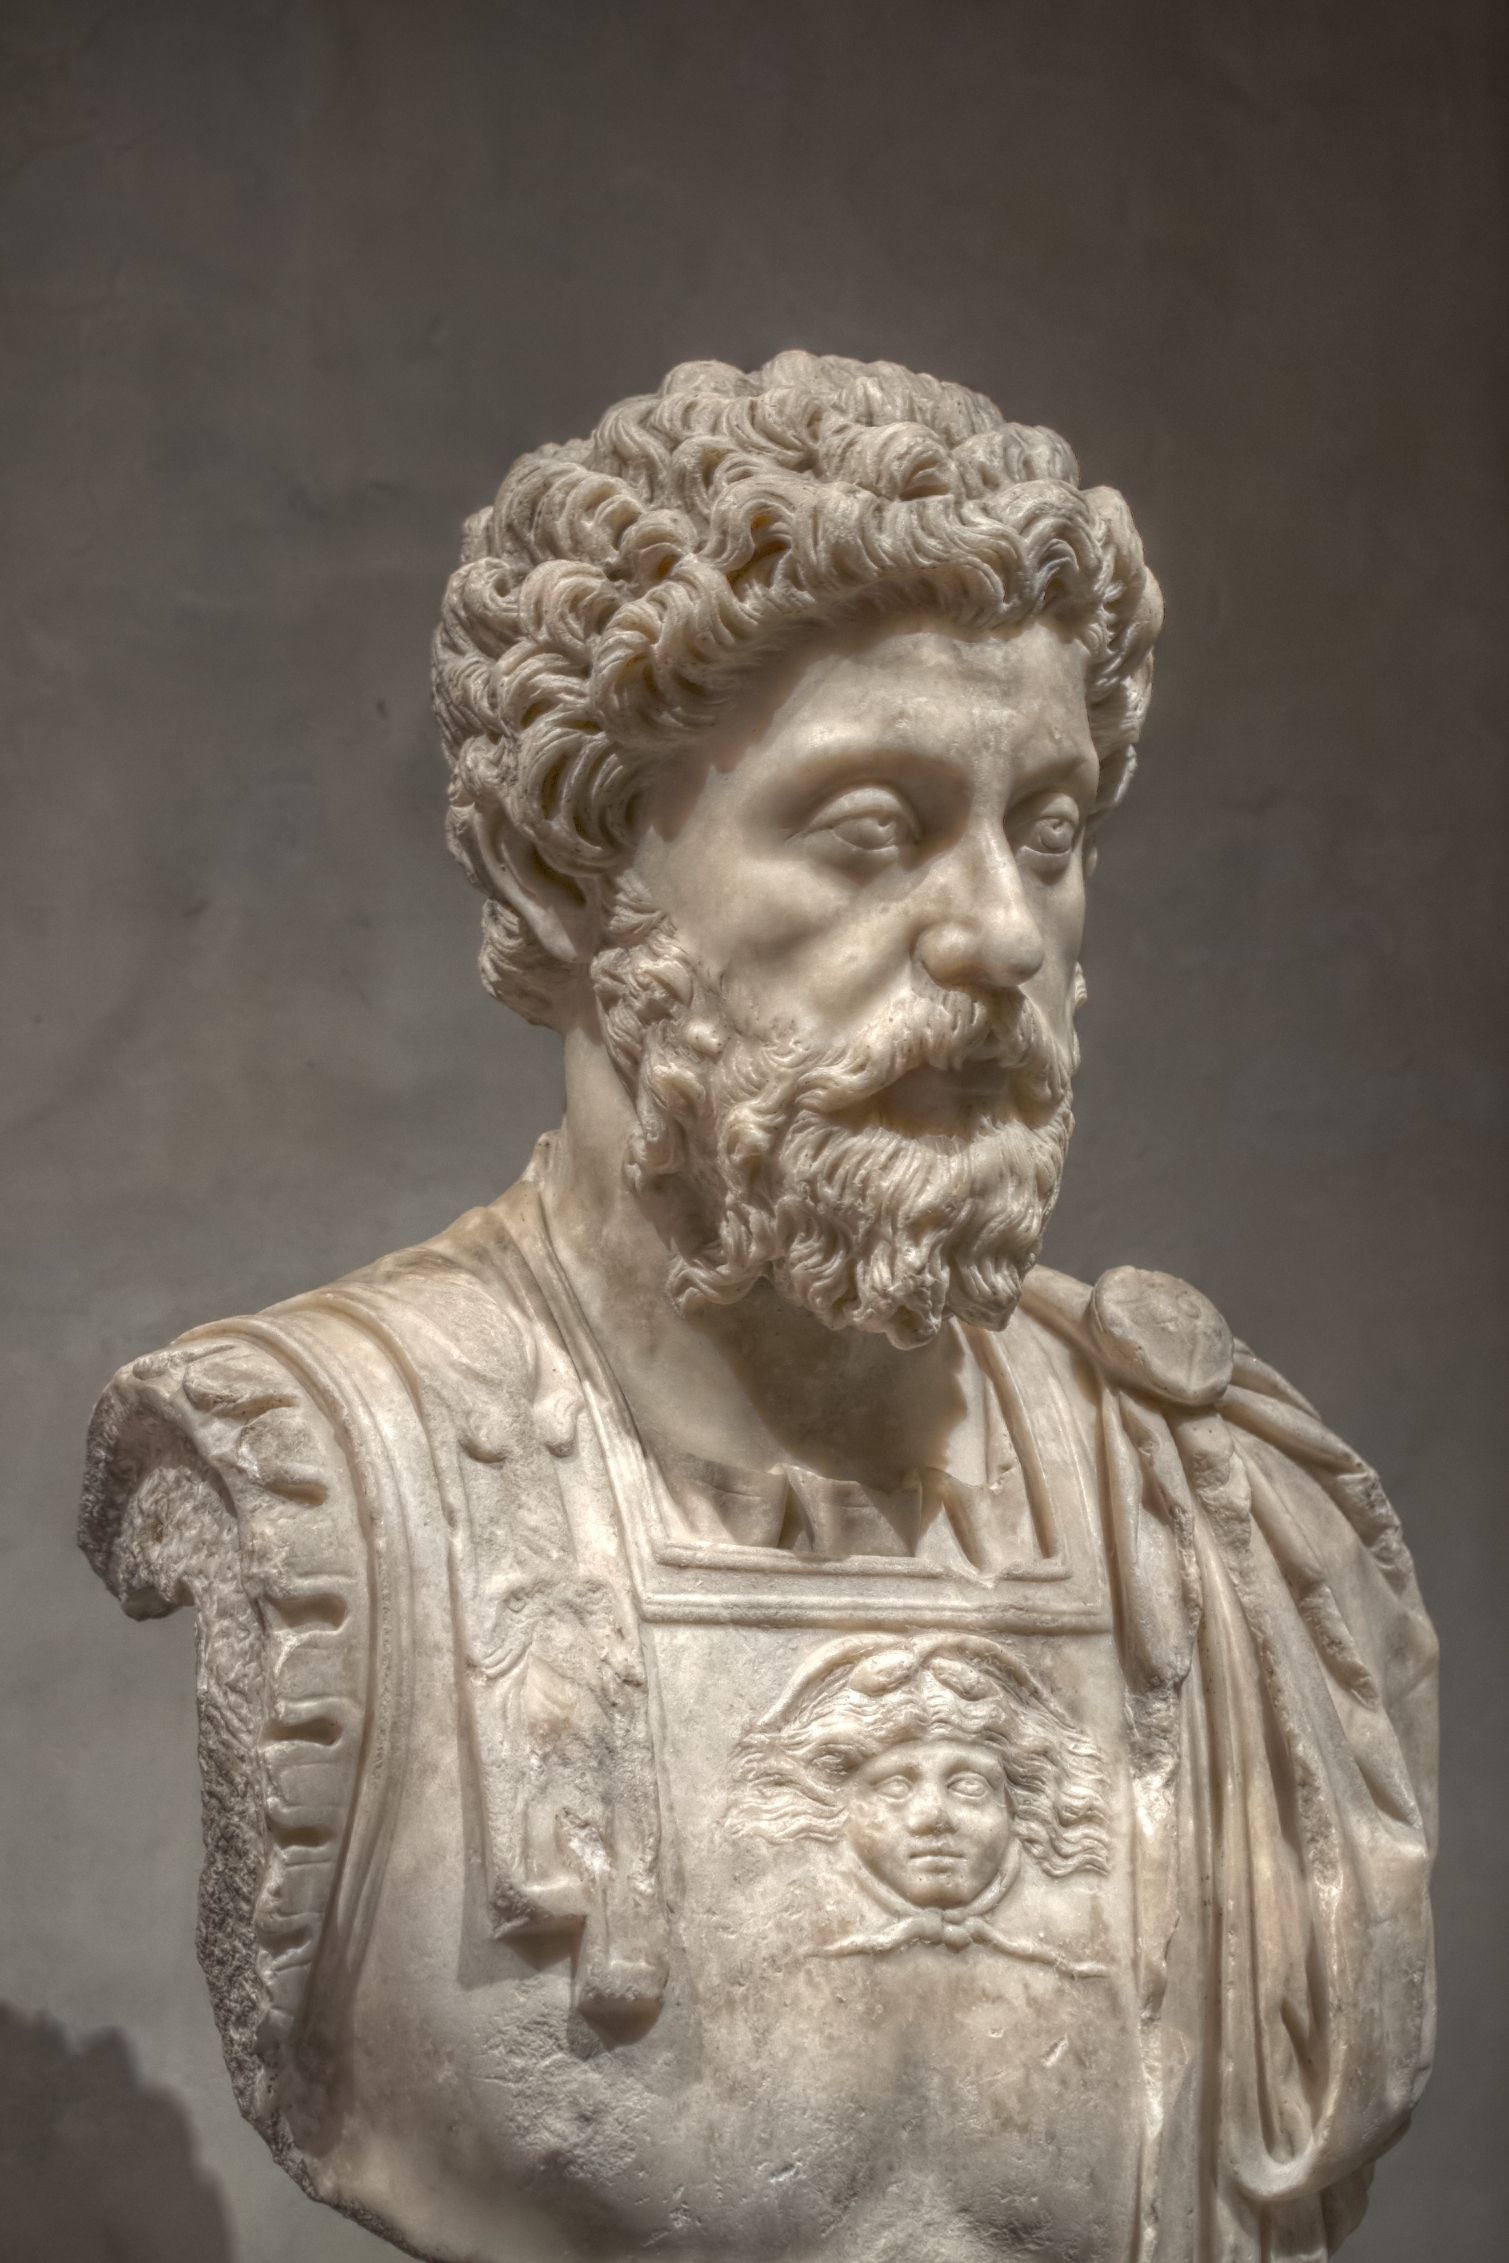 Bust of Marcus AureliusBy Pierre-Selim - Self-photographed, CC BY-SA 3.0, https://commons.wikimedia.org/w/index.php?curid=18101954